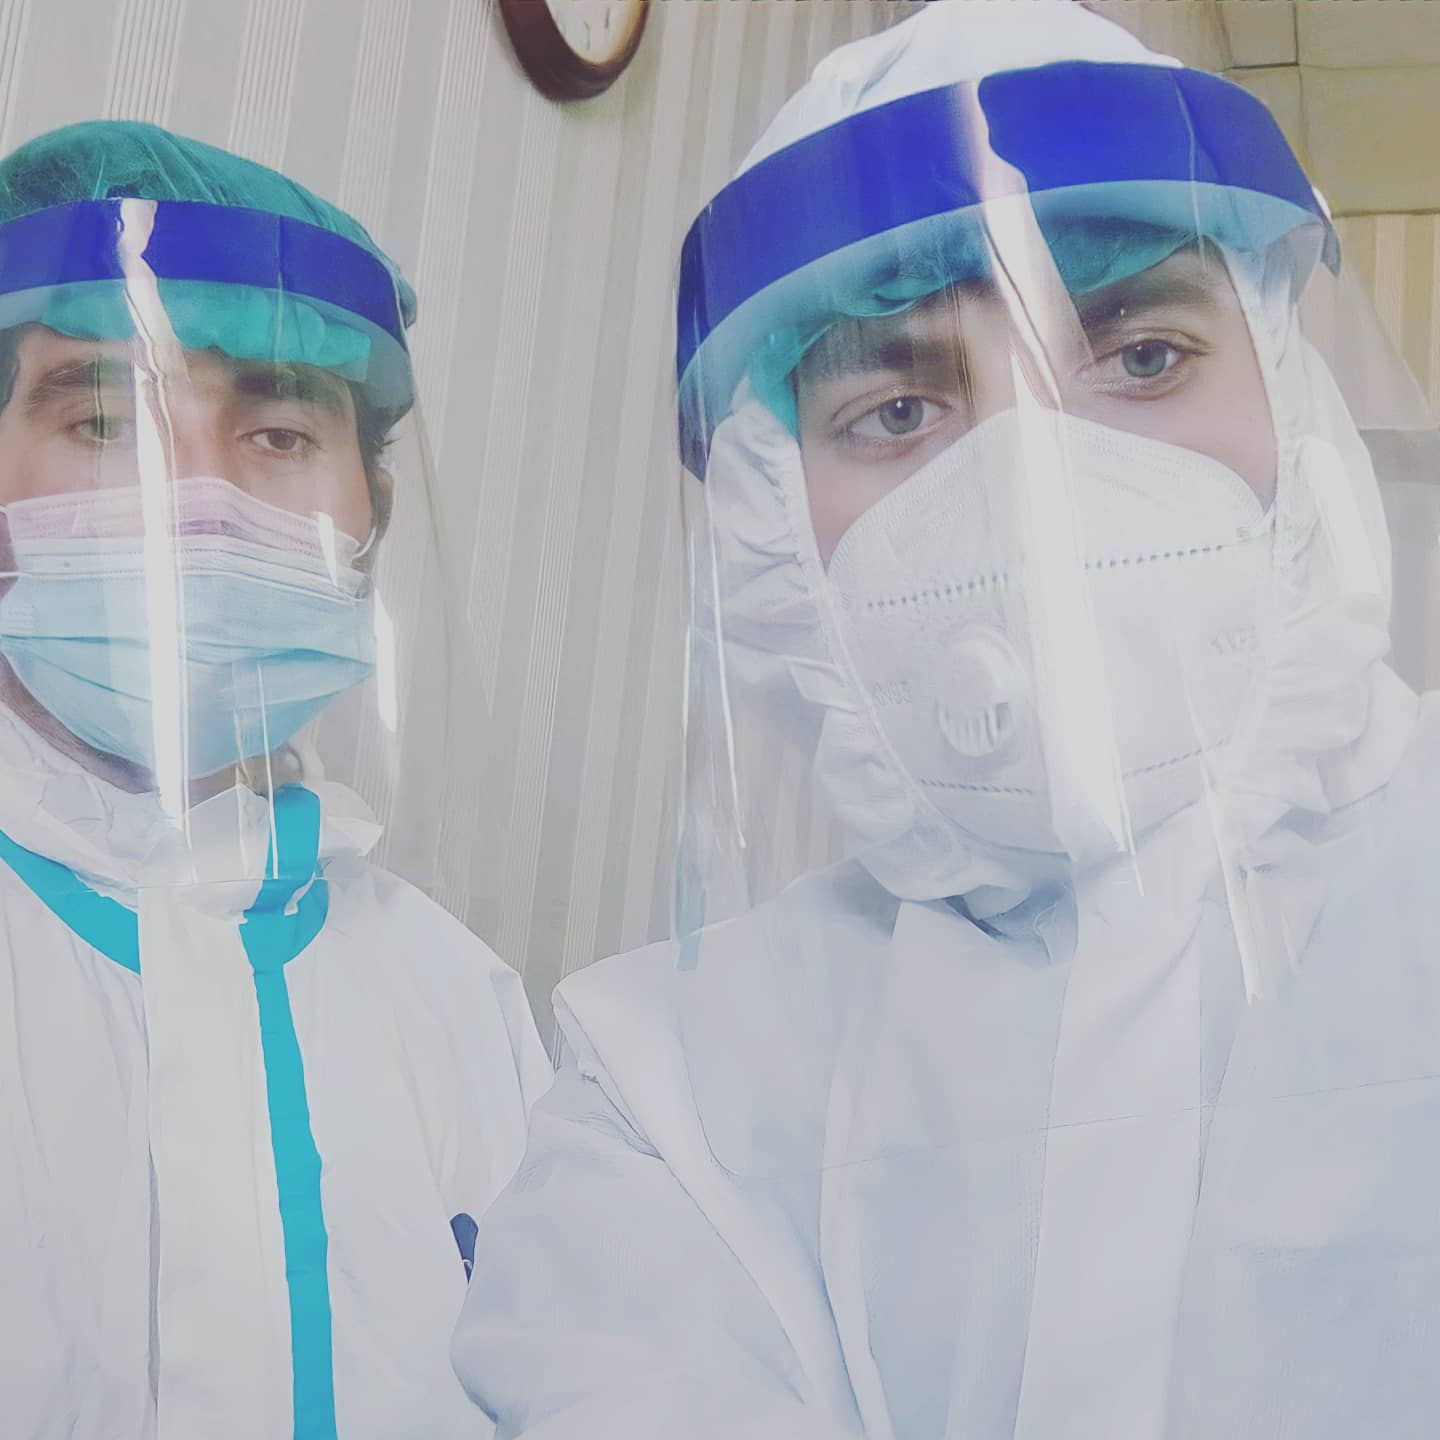 Doctor shows what being in PPE suit for 15 hours looks like